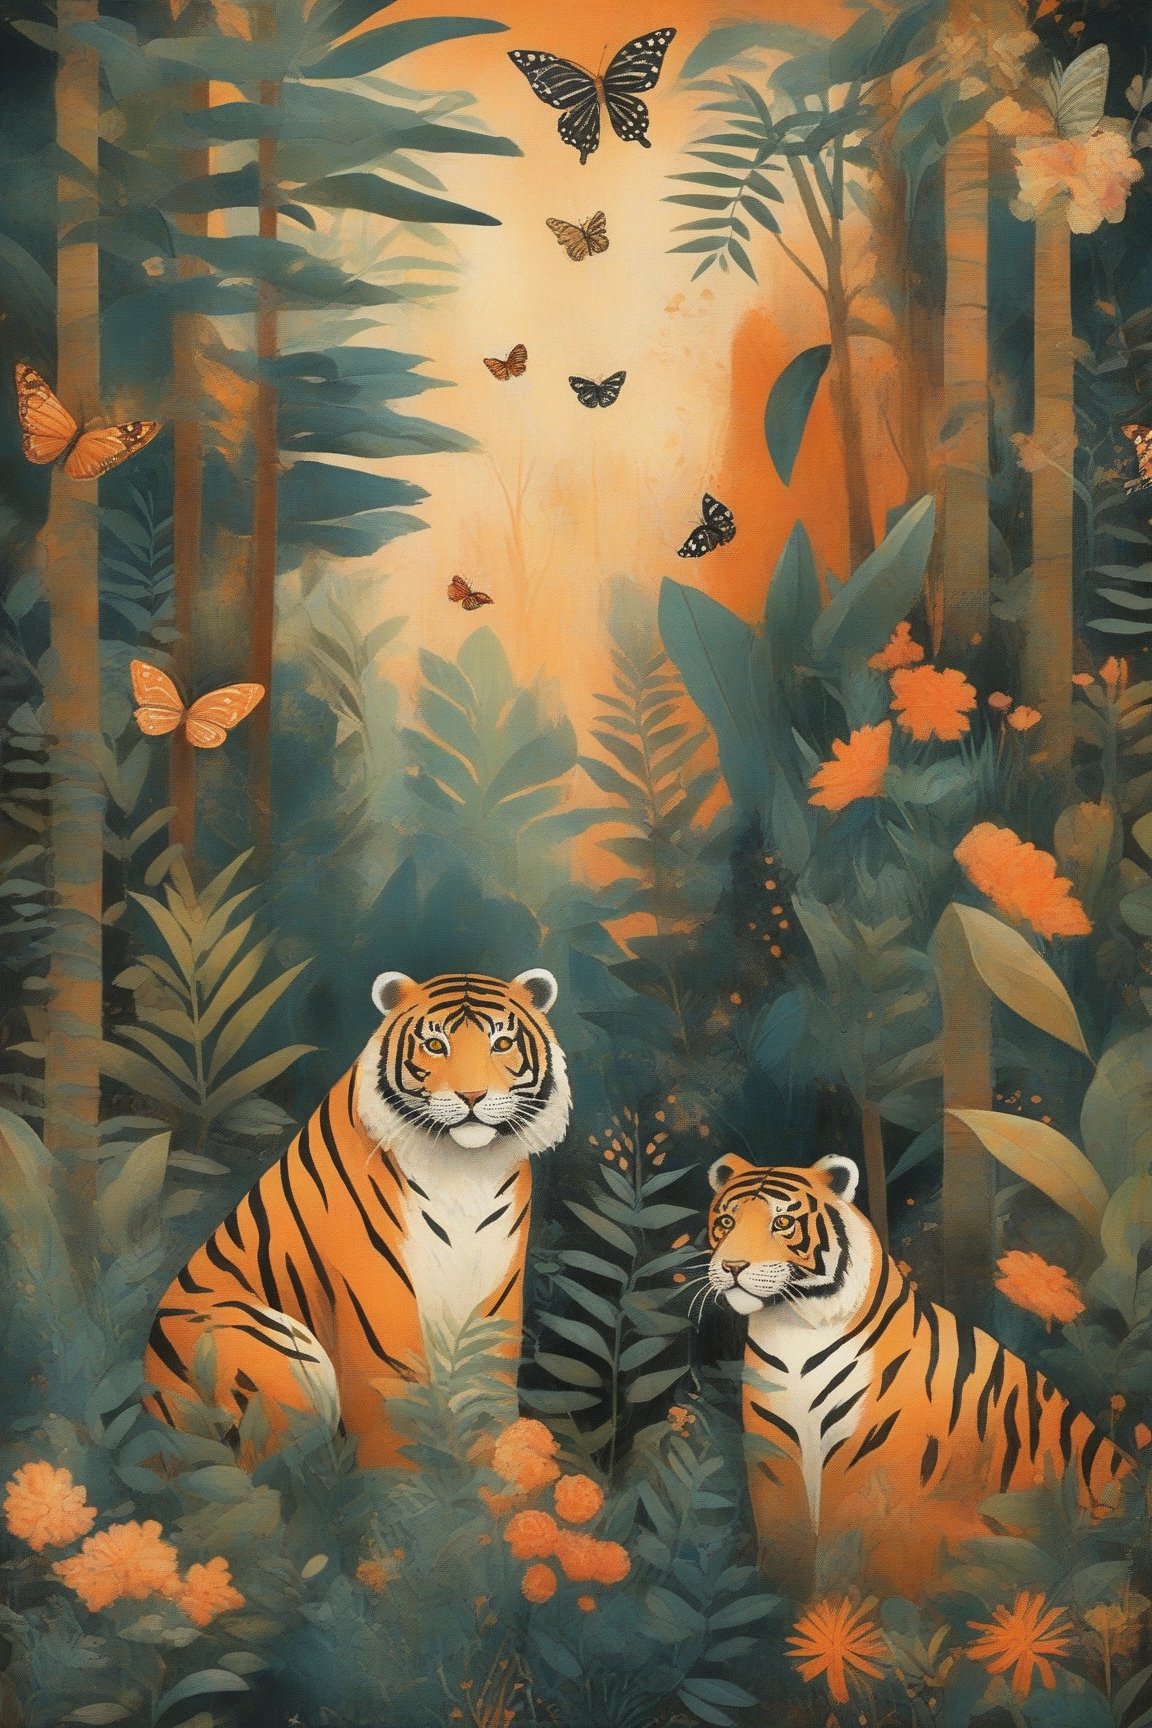 A vibrant and colorful jungle scene. Dominating the scene are three tigers, each with distinct patterns and colors. One tiger is orange with black spots, another is a mix of orange and white, and the third is a pale orange with black stripes. Surrounding the tigers are various tropical plants, trees, and flora. There are also small creatures like a sloth hanging from a tree and a butterfly fluttering around. The overall ambiance of the image is playful and whimsical, with a harmonious blend of nature and animals